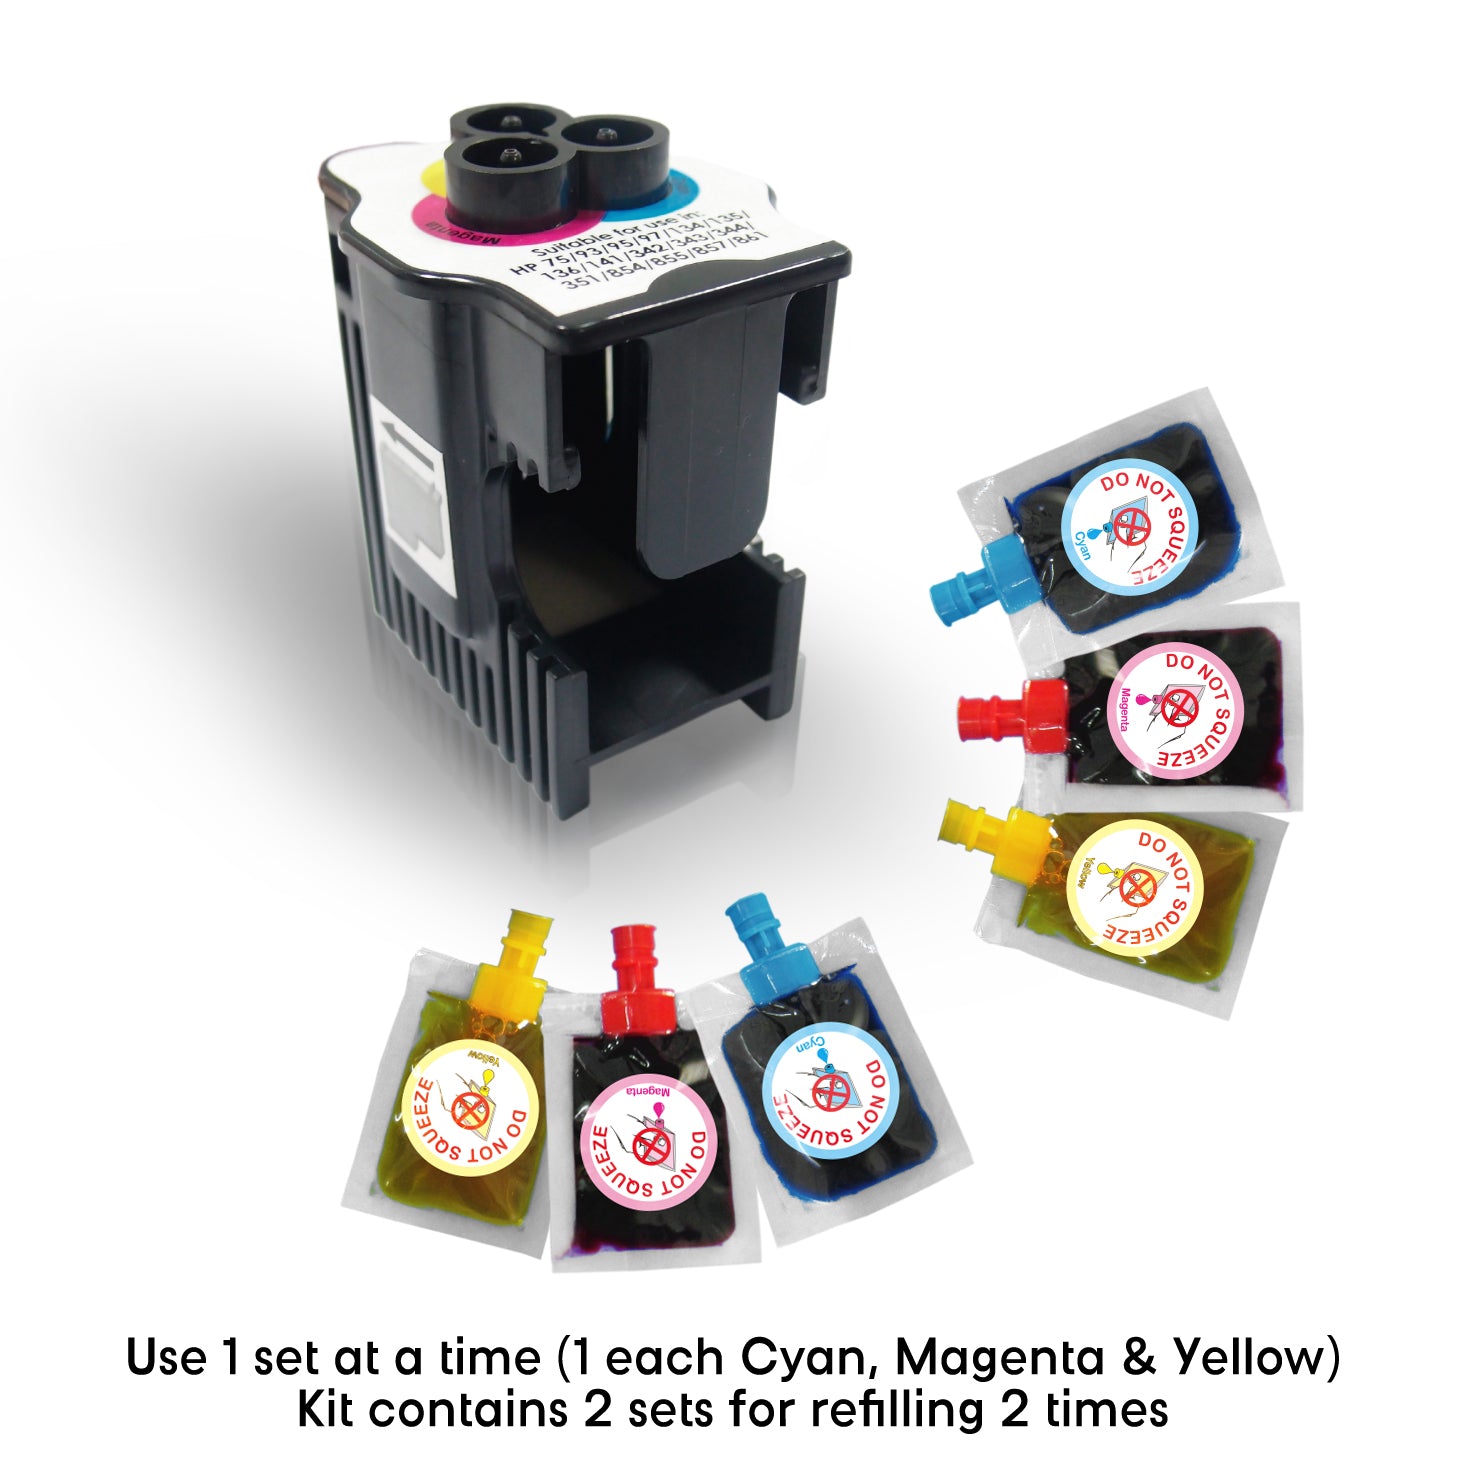 Refill kit for 123 Color  Ink Cartridge - Can be refilled 6 times with this Kit